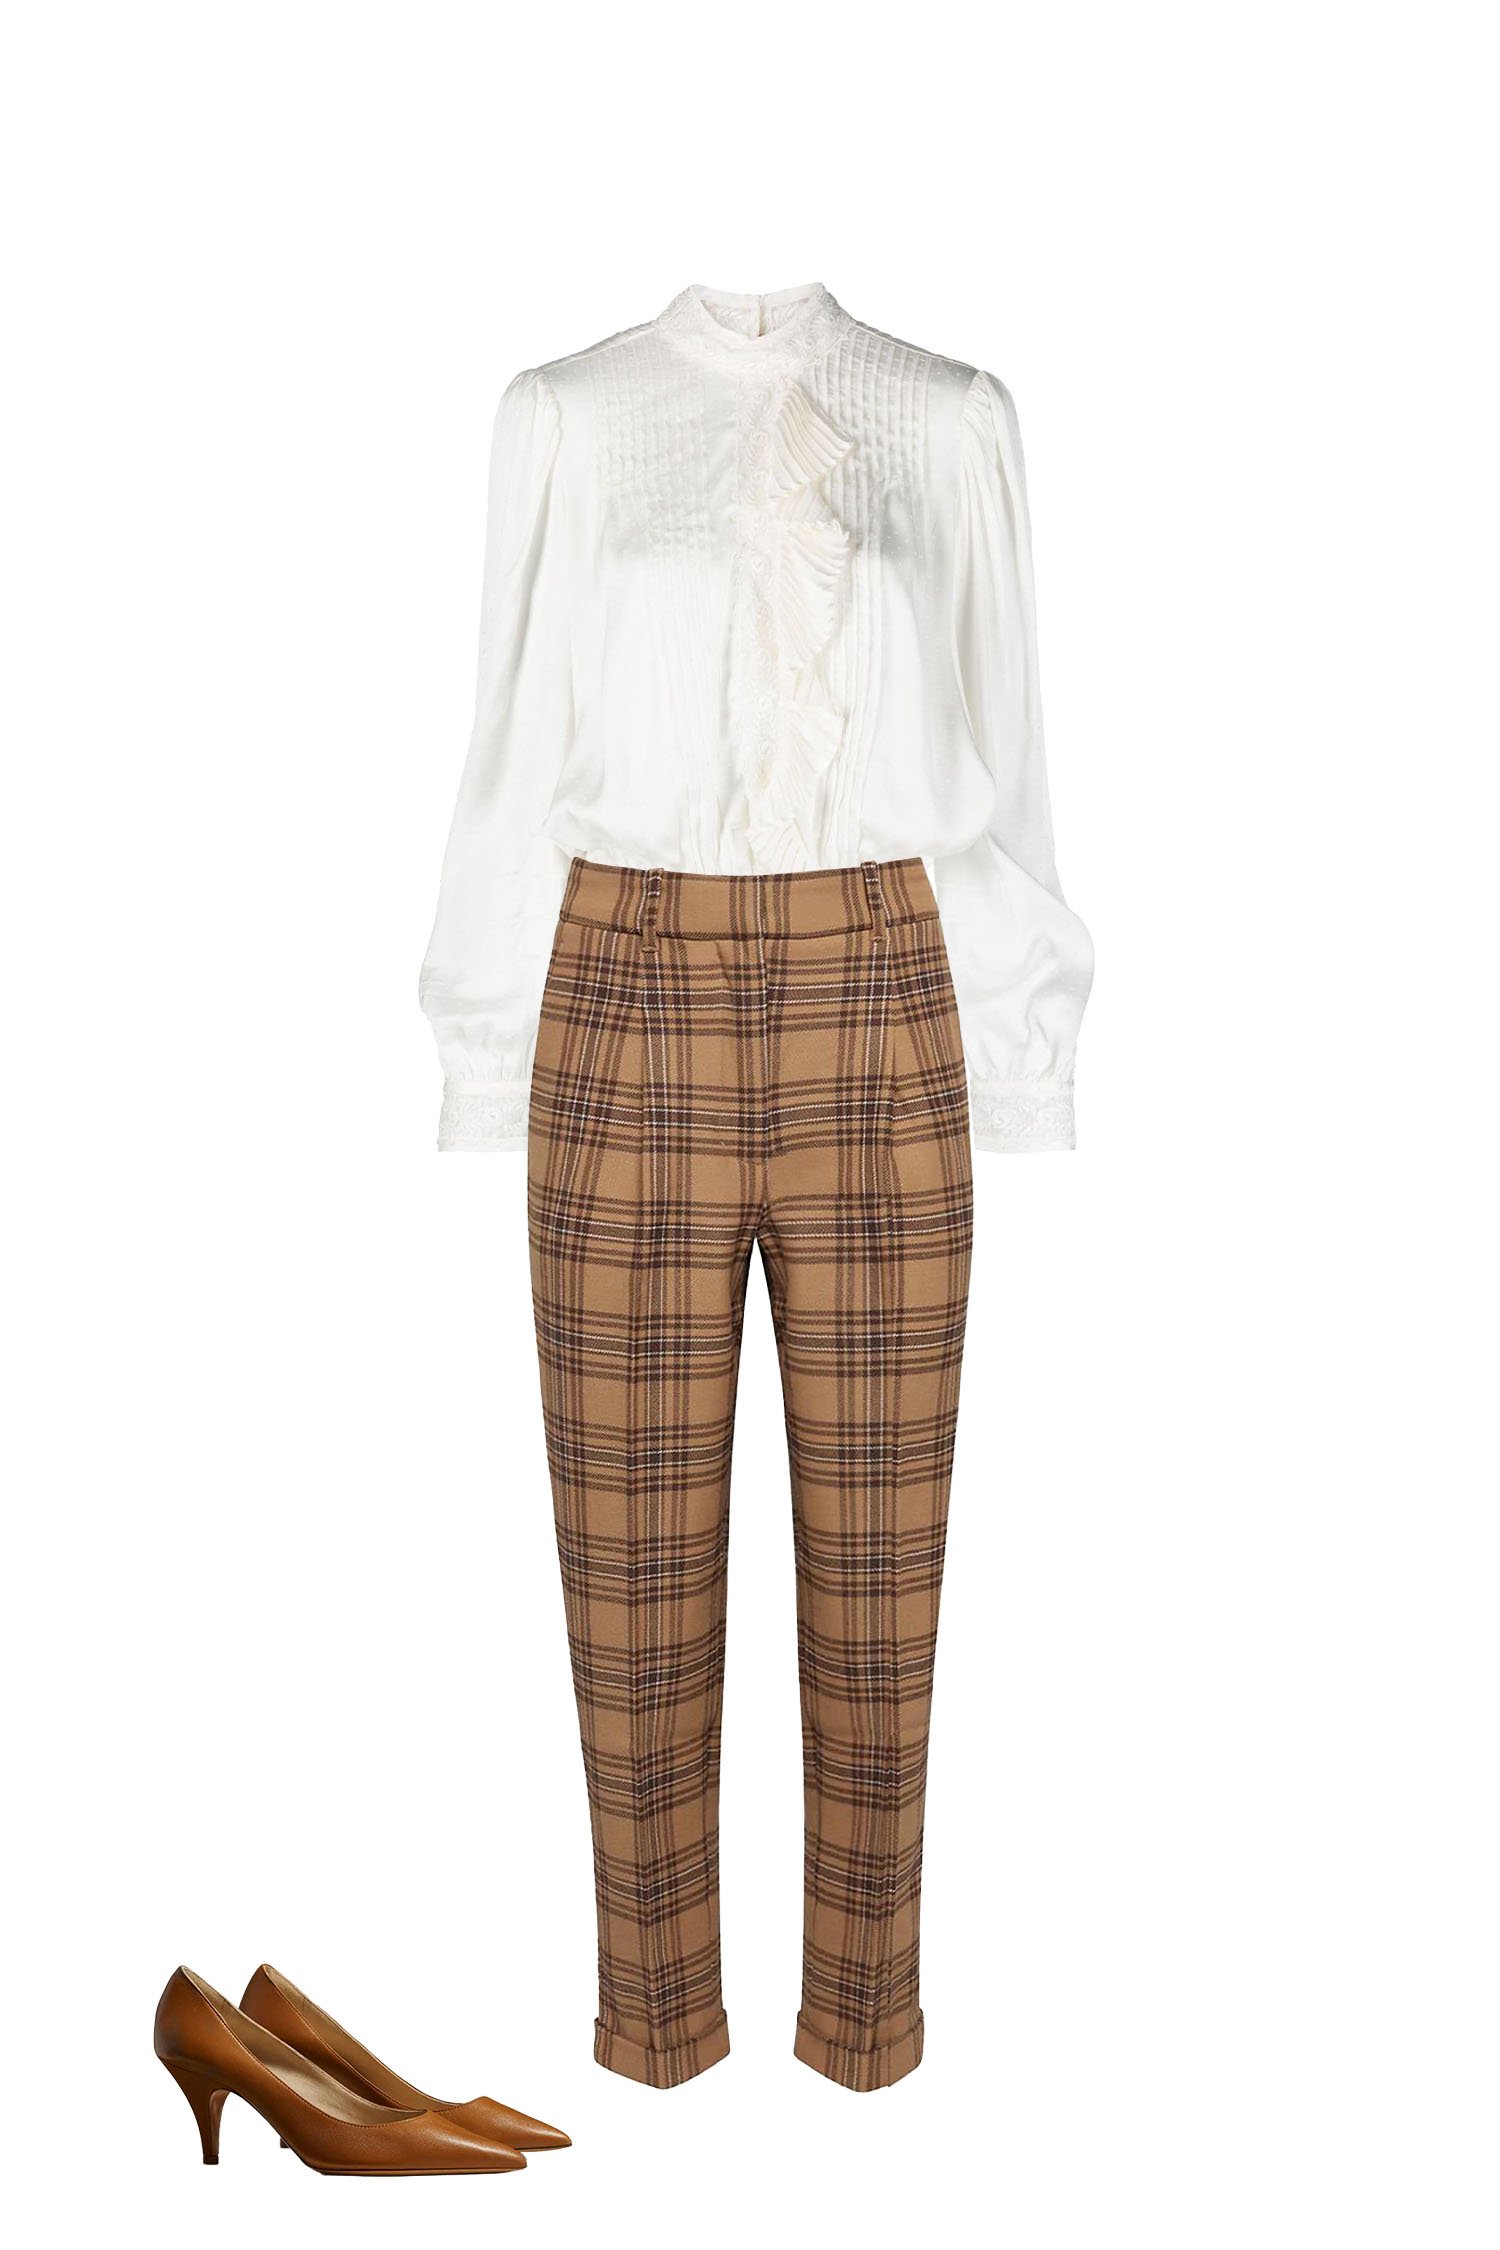 Business Casual Outfit - Camel Plaid Pants, Brown White Ruffle and Lace Blouse, Brown Pumps